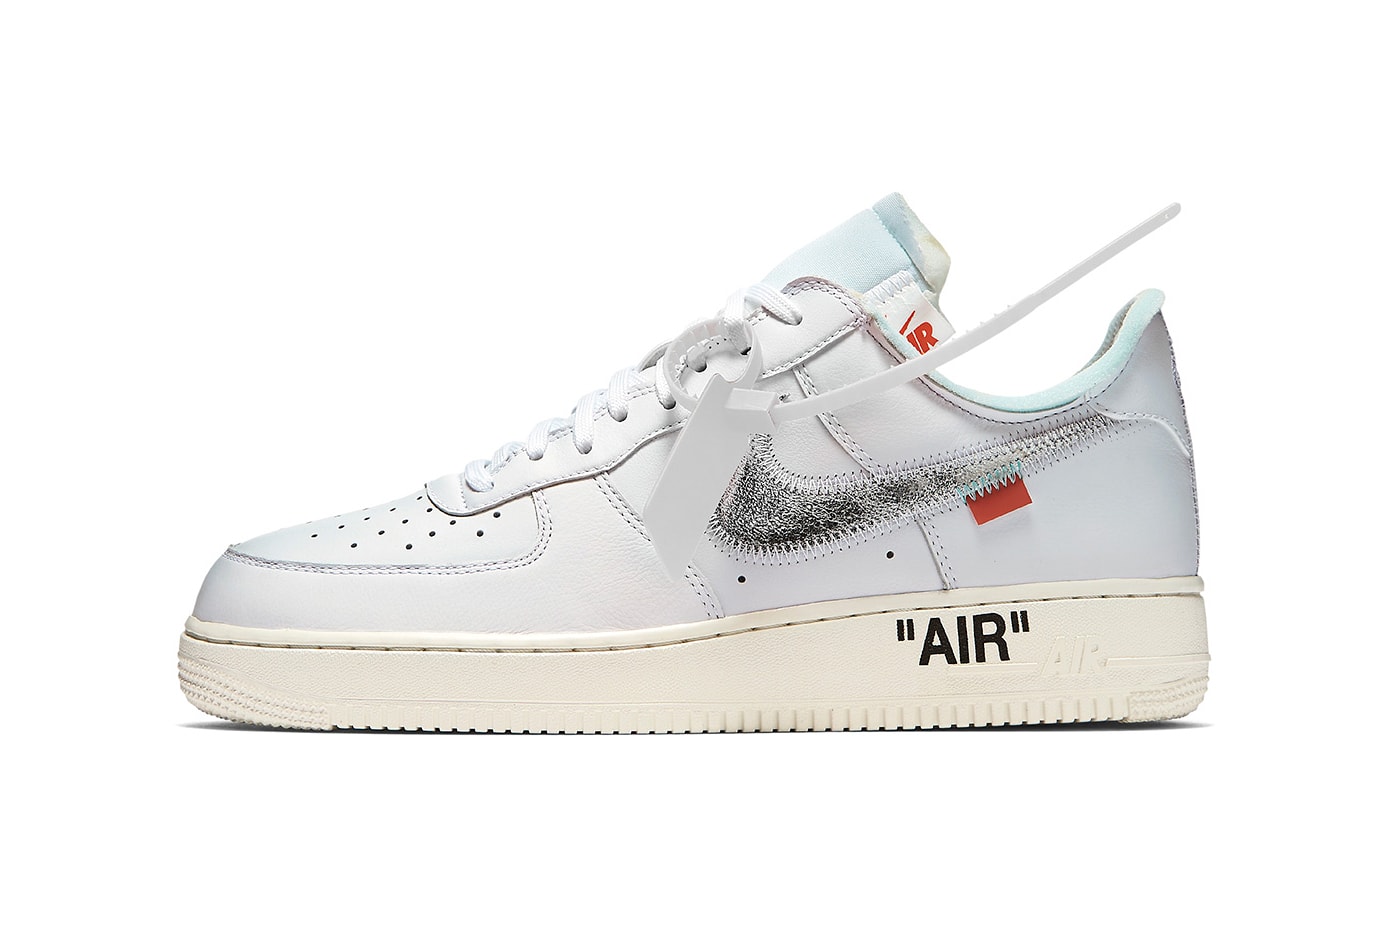 Five Nike Air Force 1 Collabs Will Debut At ComplexCon